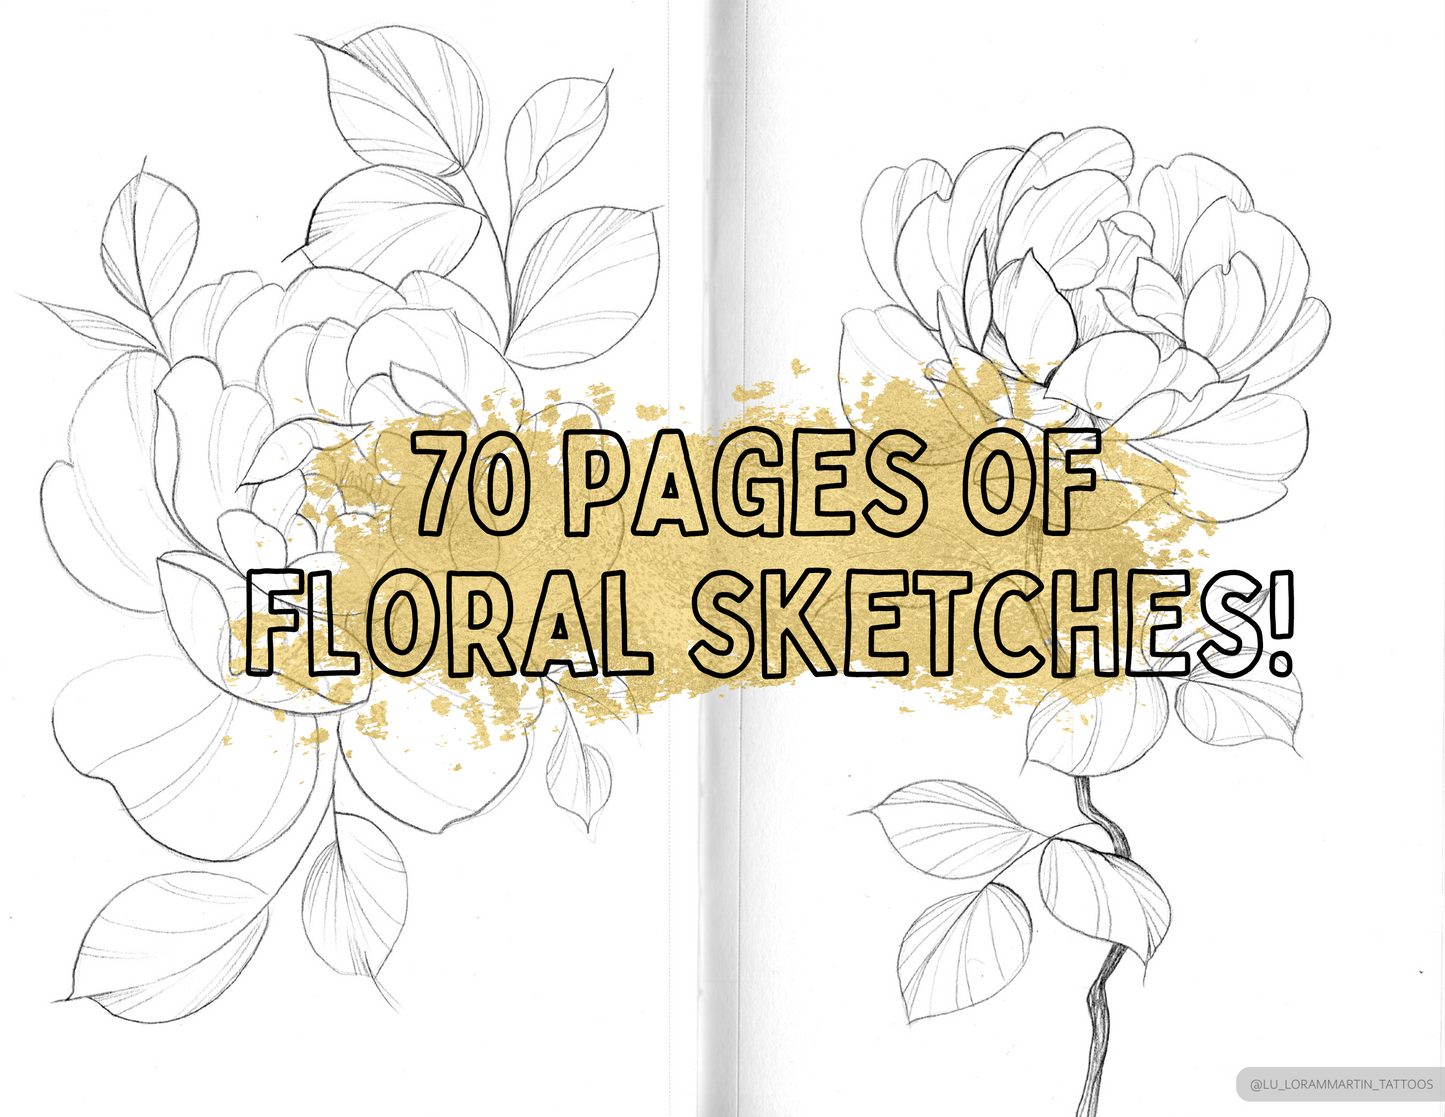 page from "floral sketchbook vol.I" by lu loram martin, top large bold blackwork flower tattoo specialist, and illustrator, based in toronto, canada,  showing beautiful rose sketches across an open sketchbook